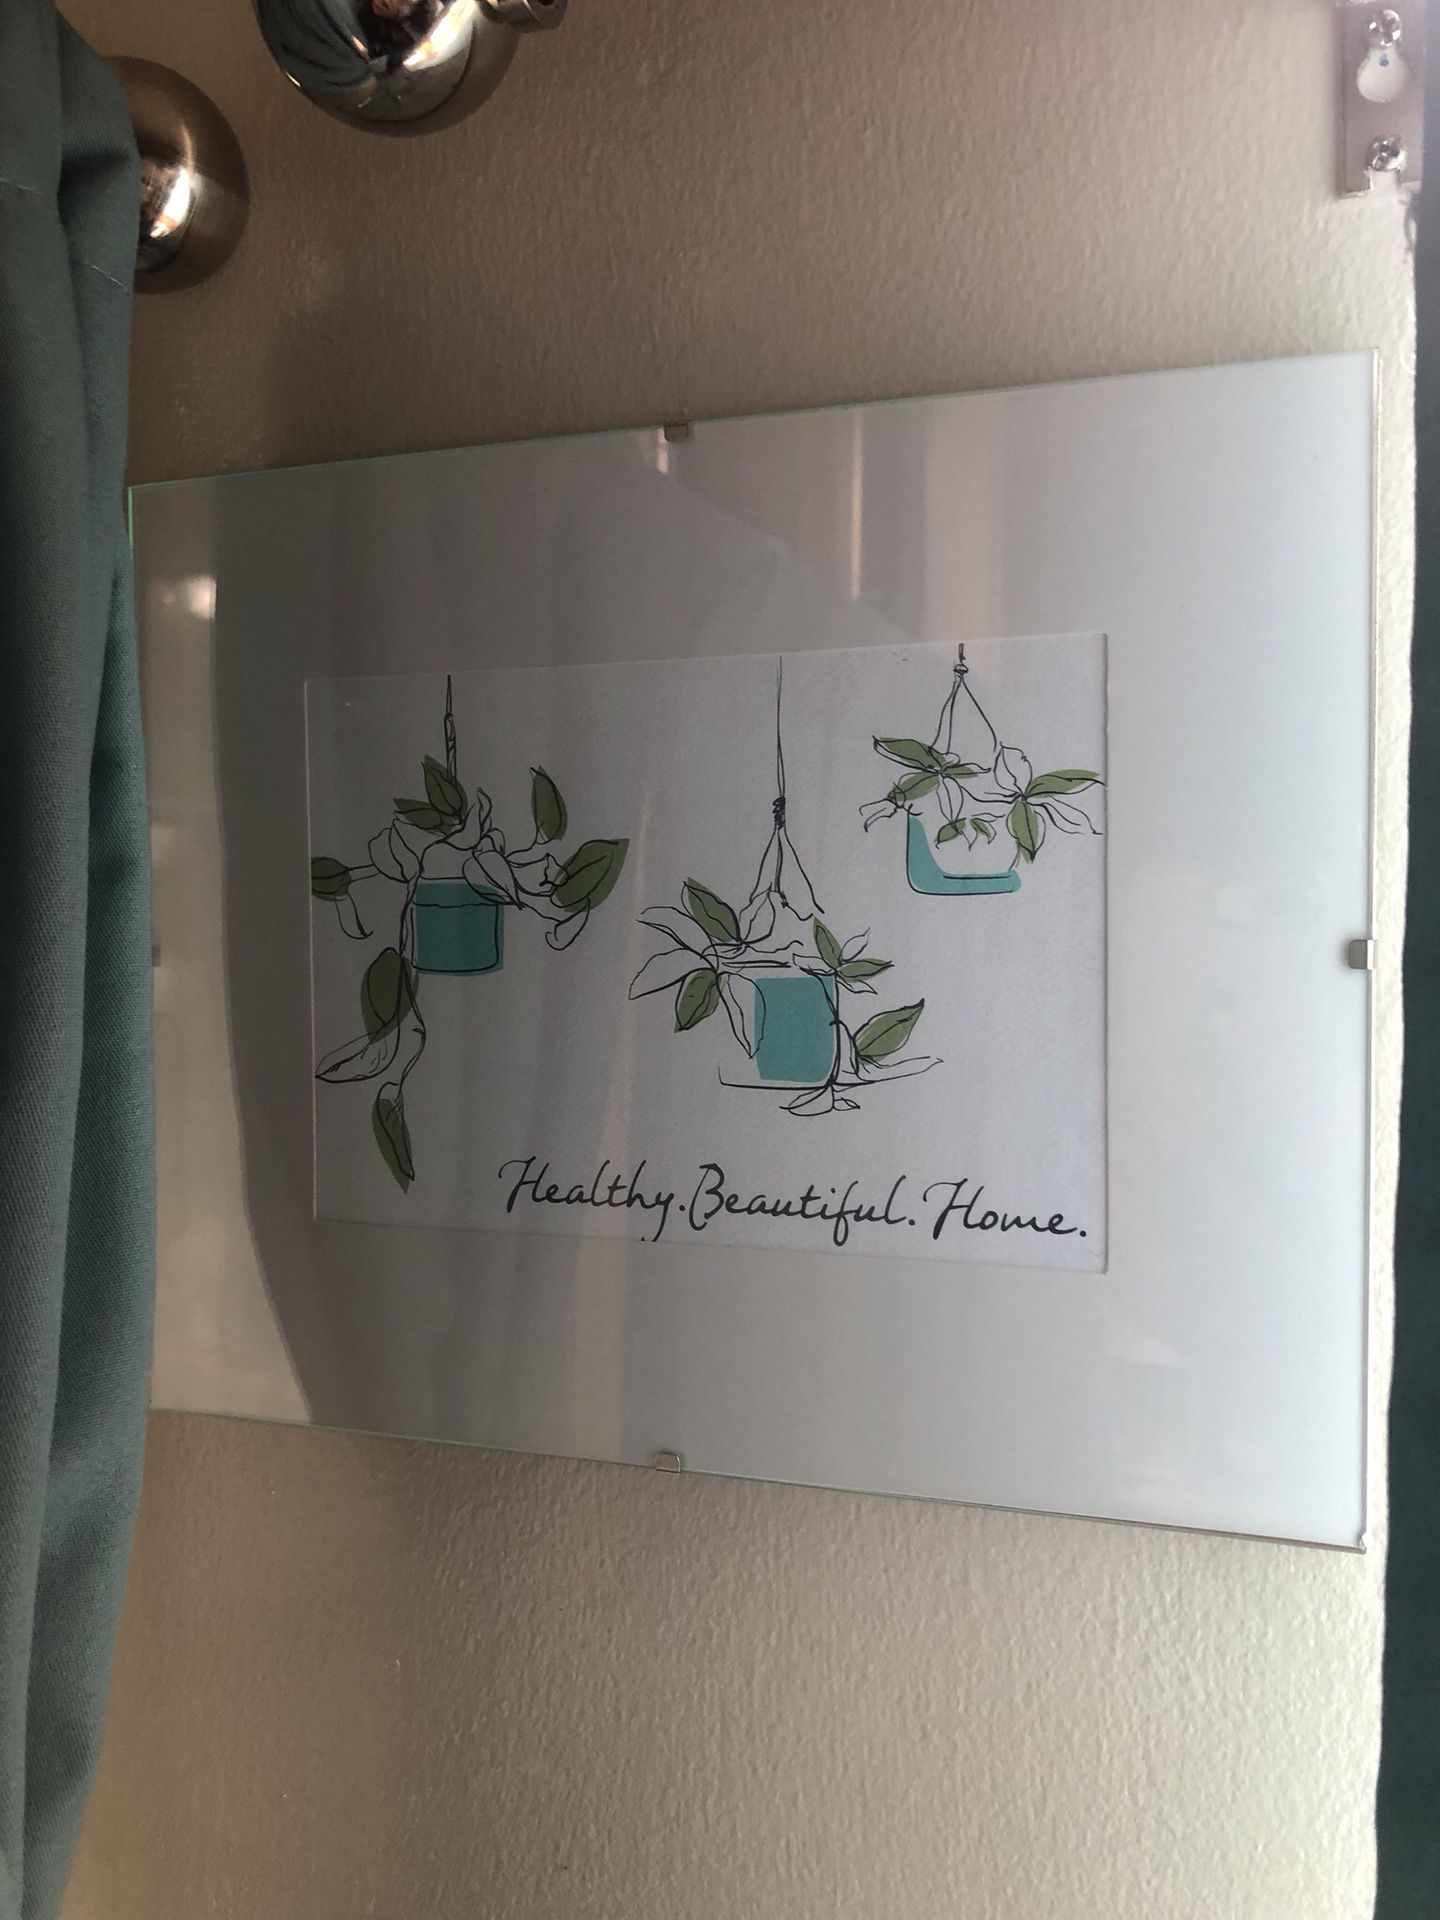 Plant picture in glass frame